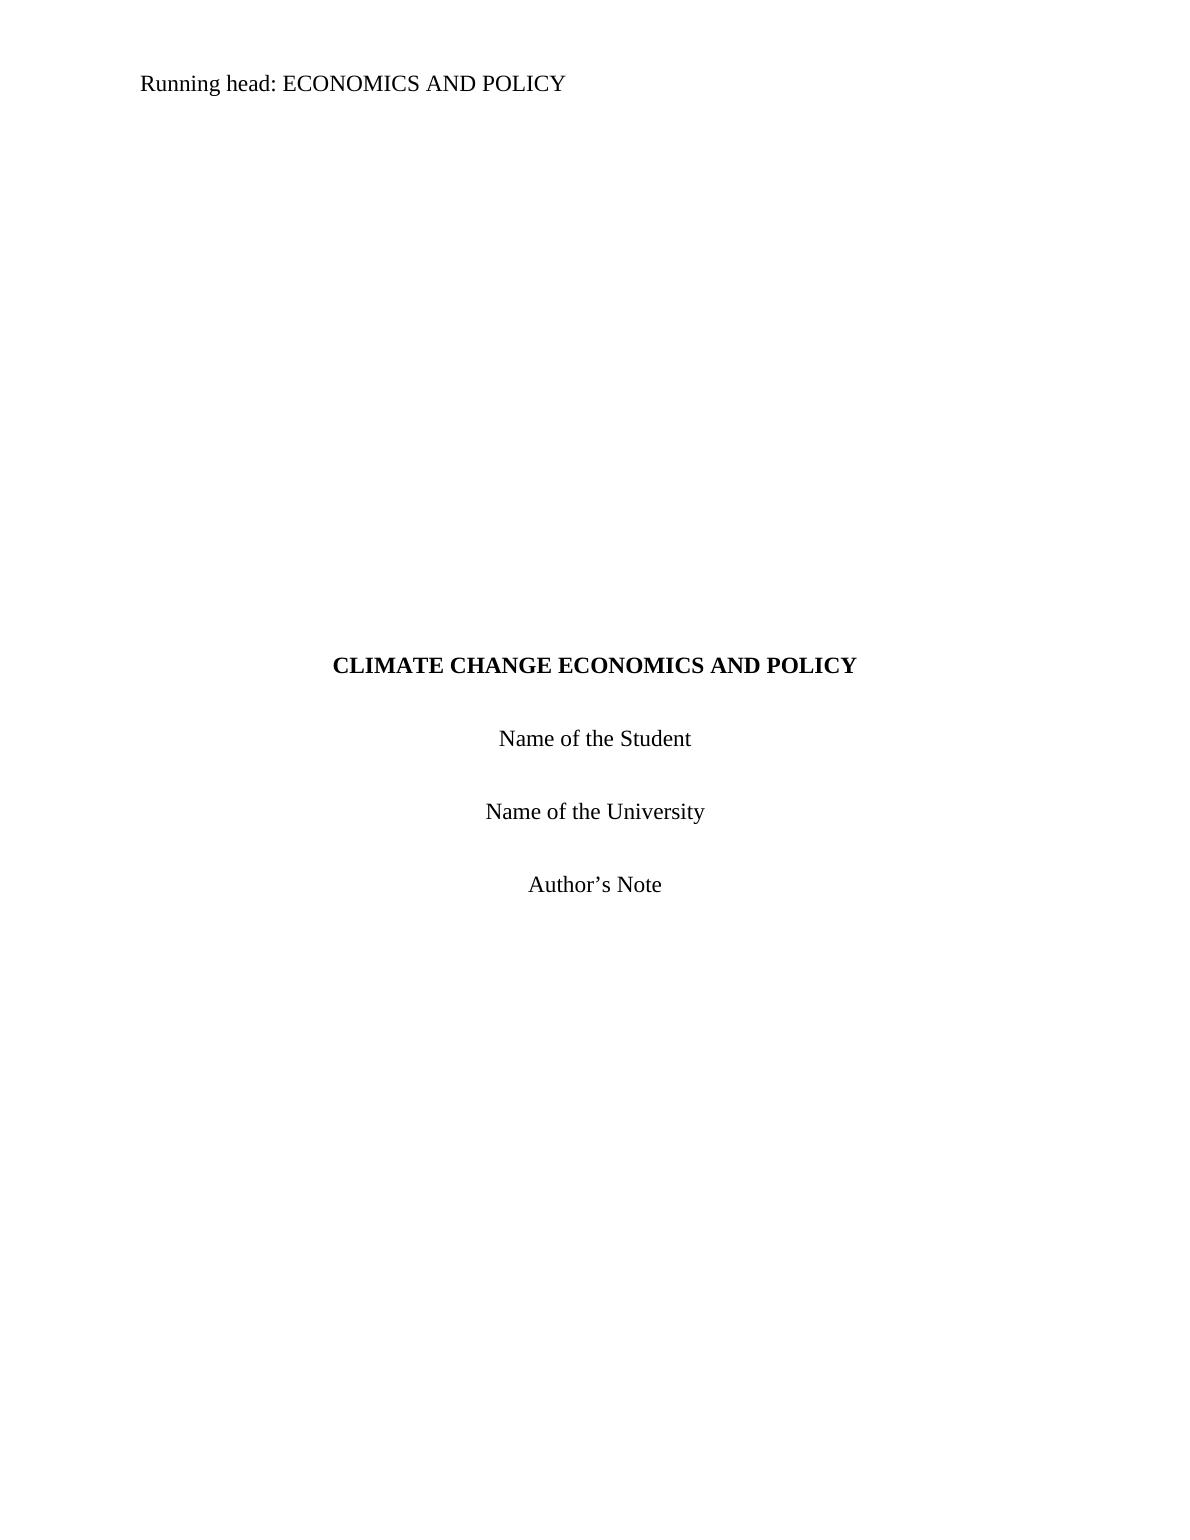 Climate Change Economics and Policy - Assignment_1